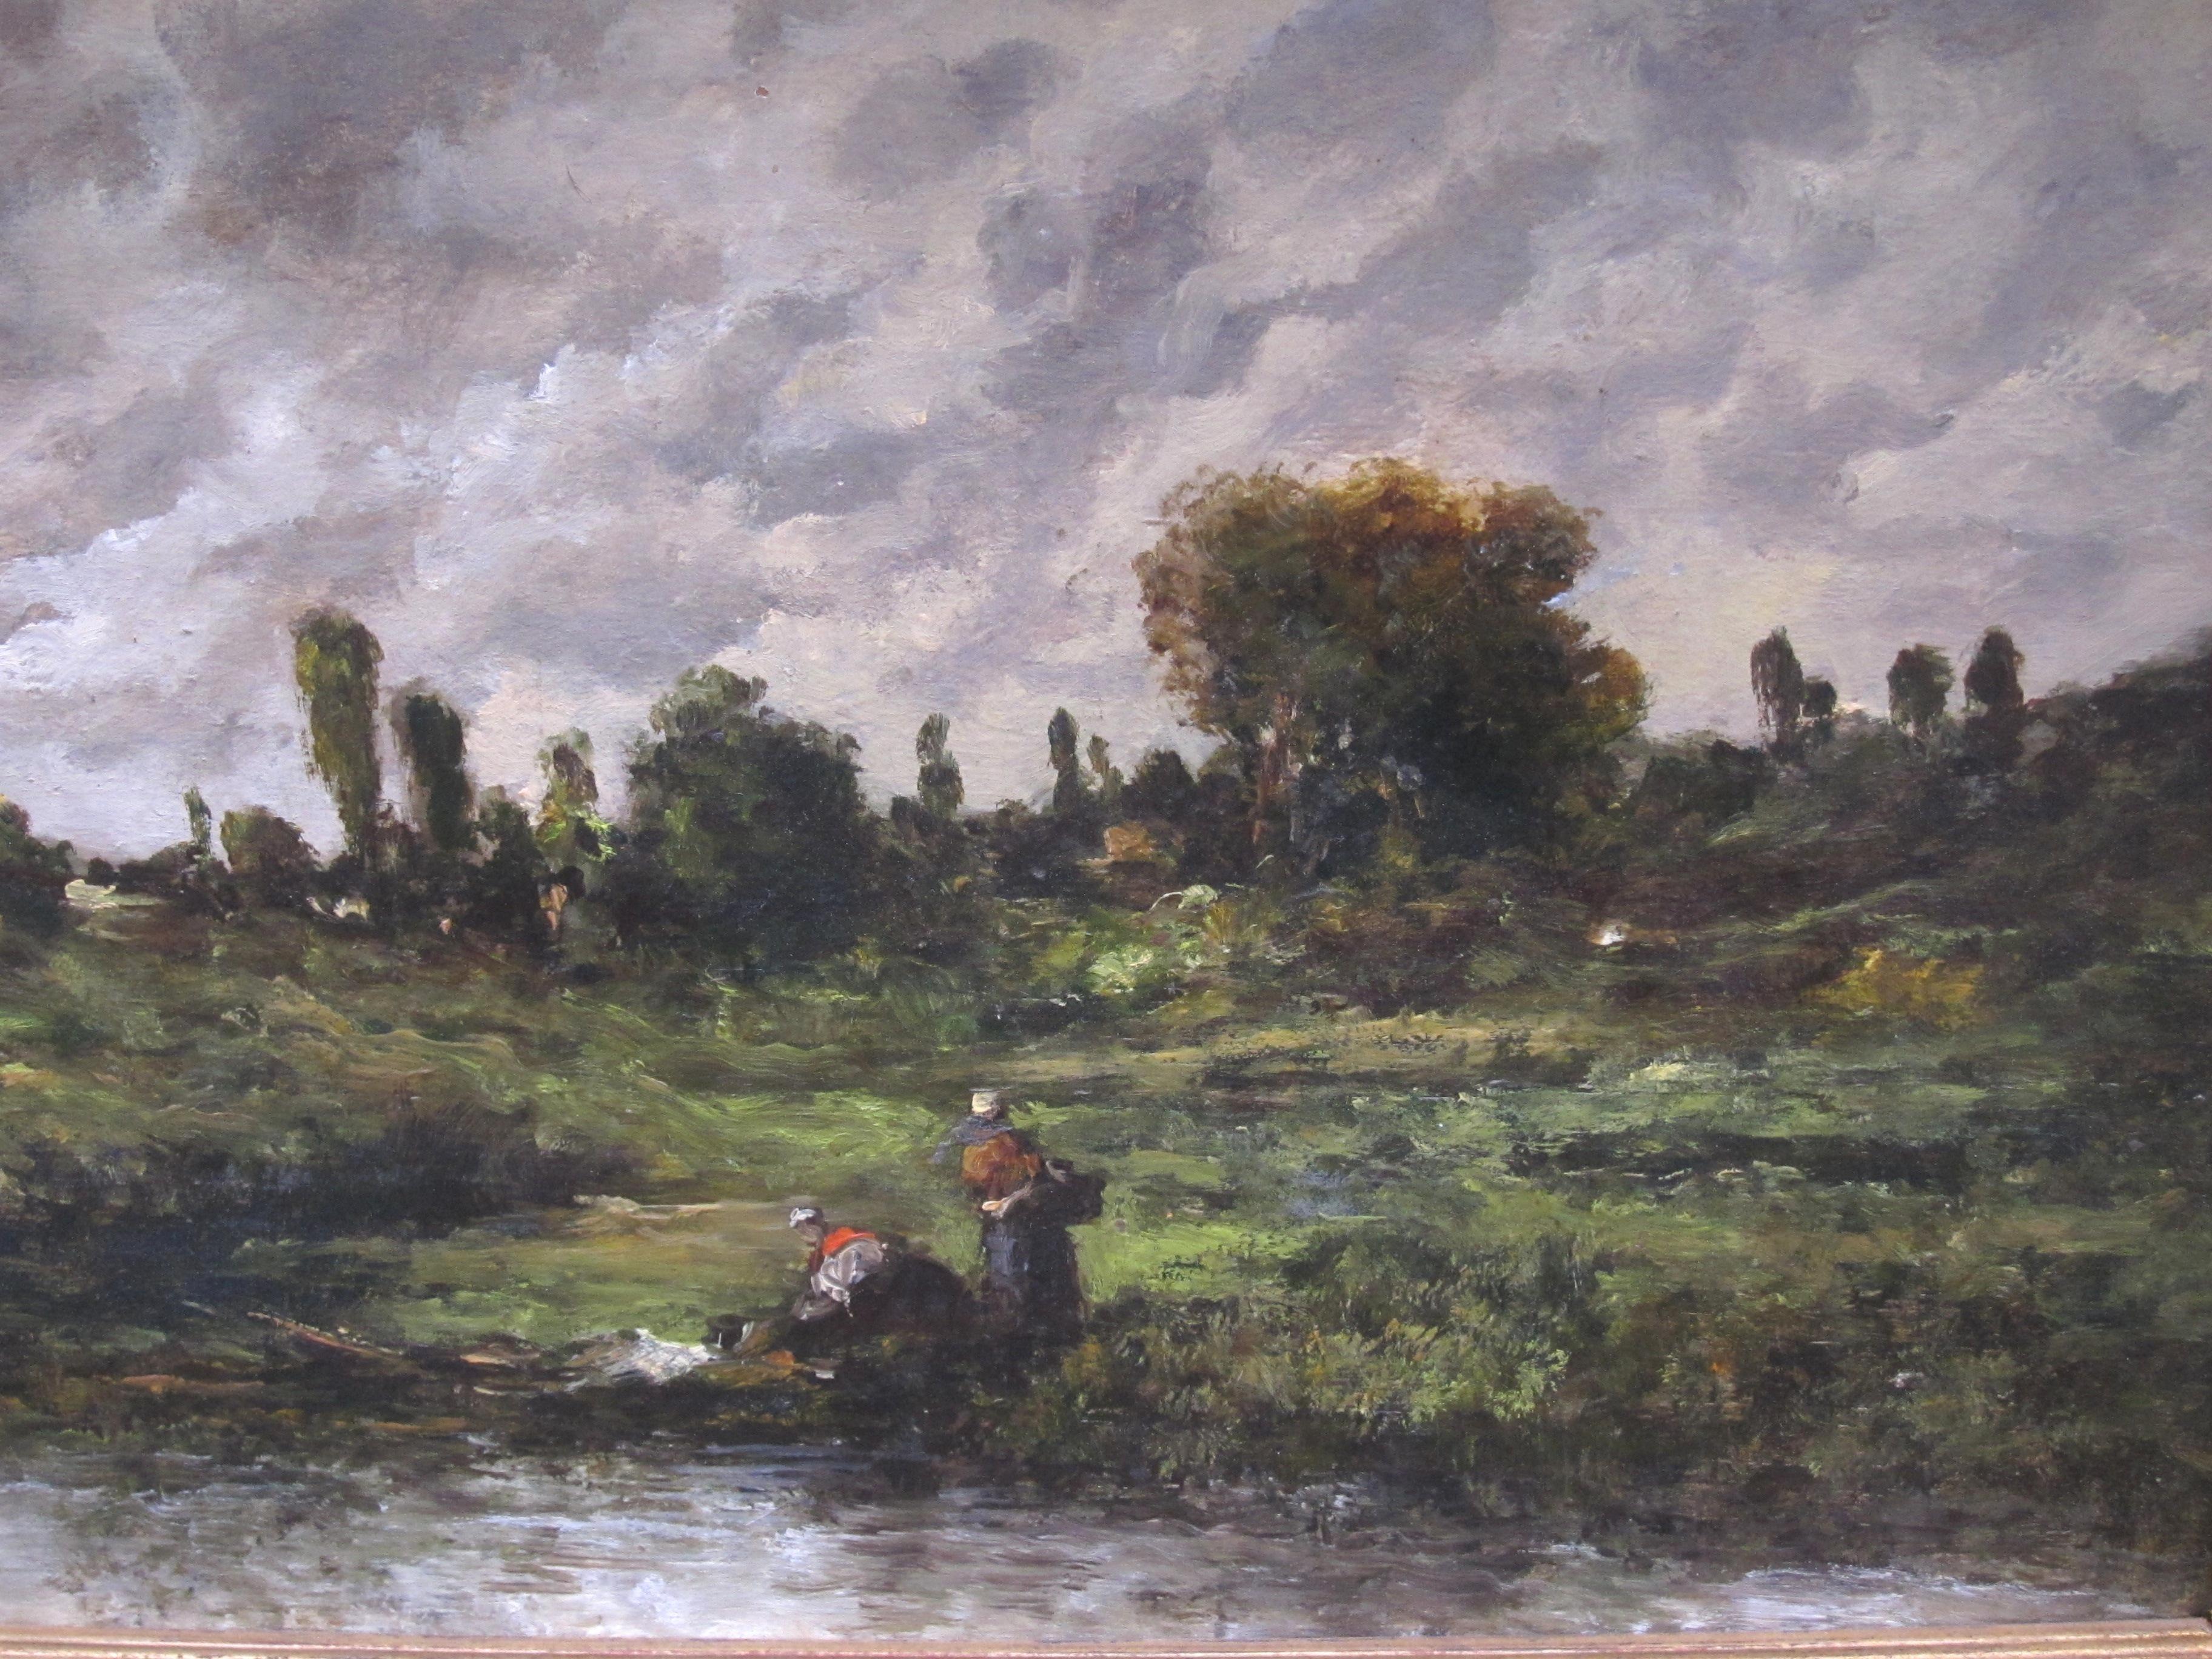 Washerwomen at the edges of the pool before the storm, oil on panel, signed Joseph Foxcroft Cole (1837-1892).
American School XIXth century.

Our painting is directly inspired by the movement of the Barbizon School.

Joseph Foxcroft Cole began his